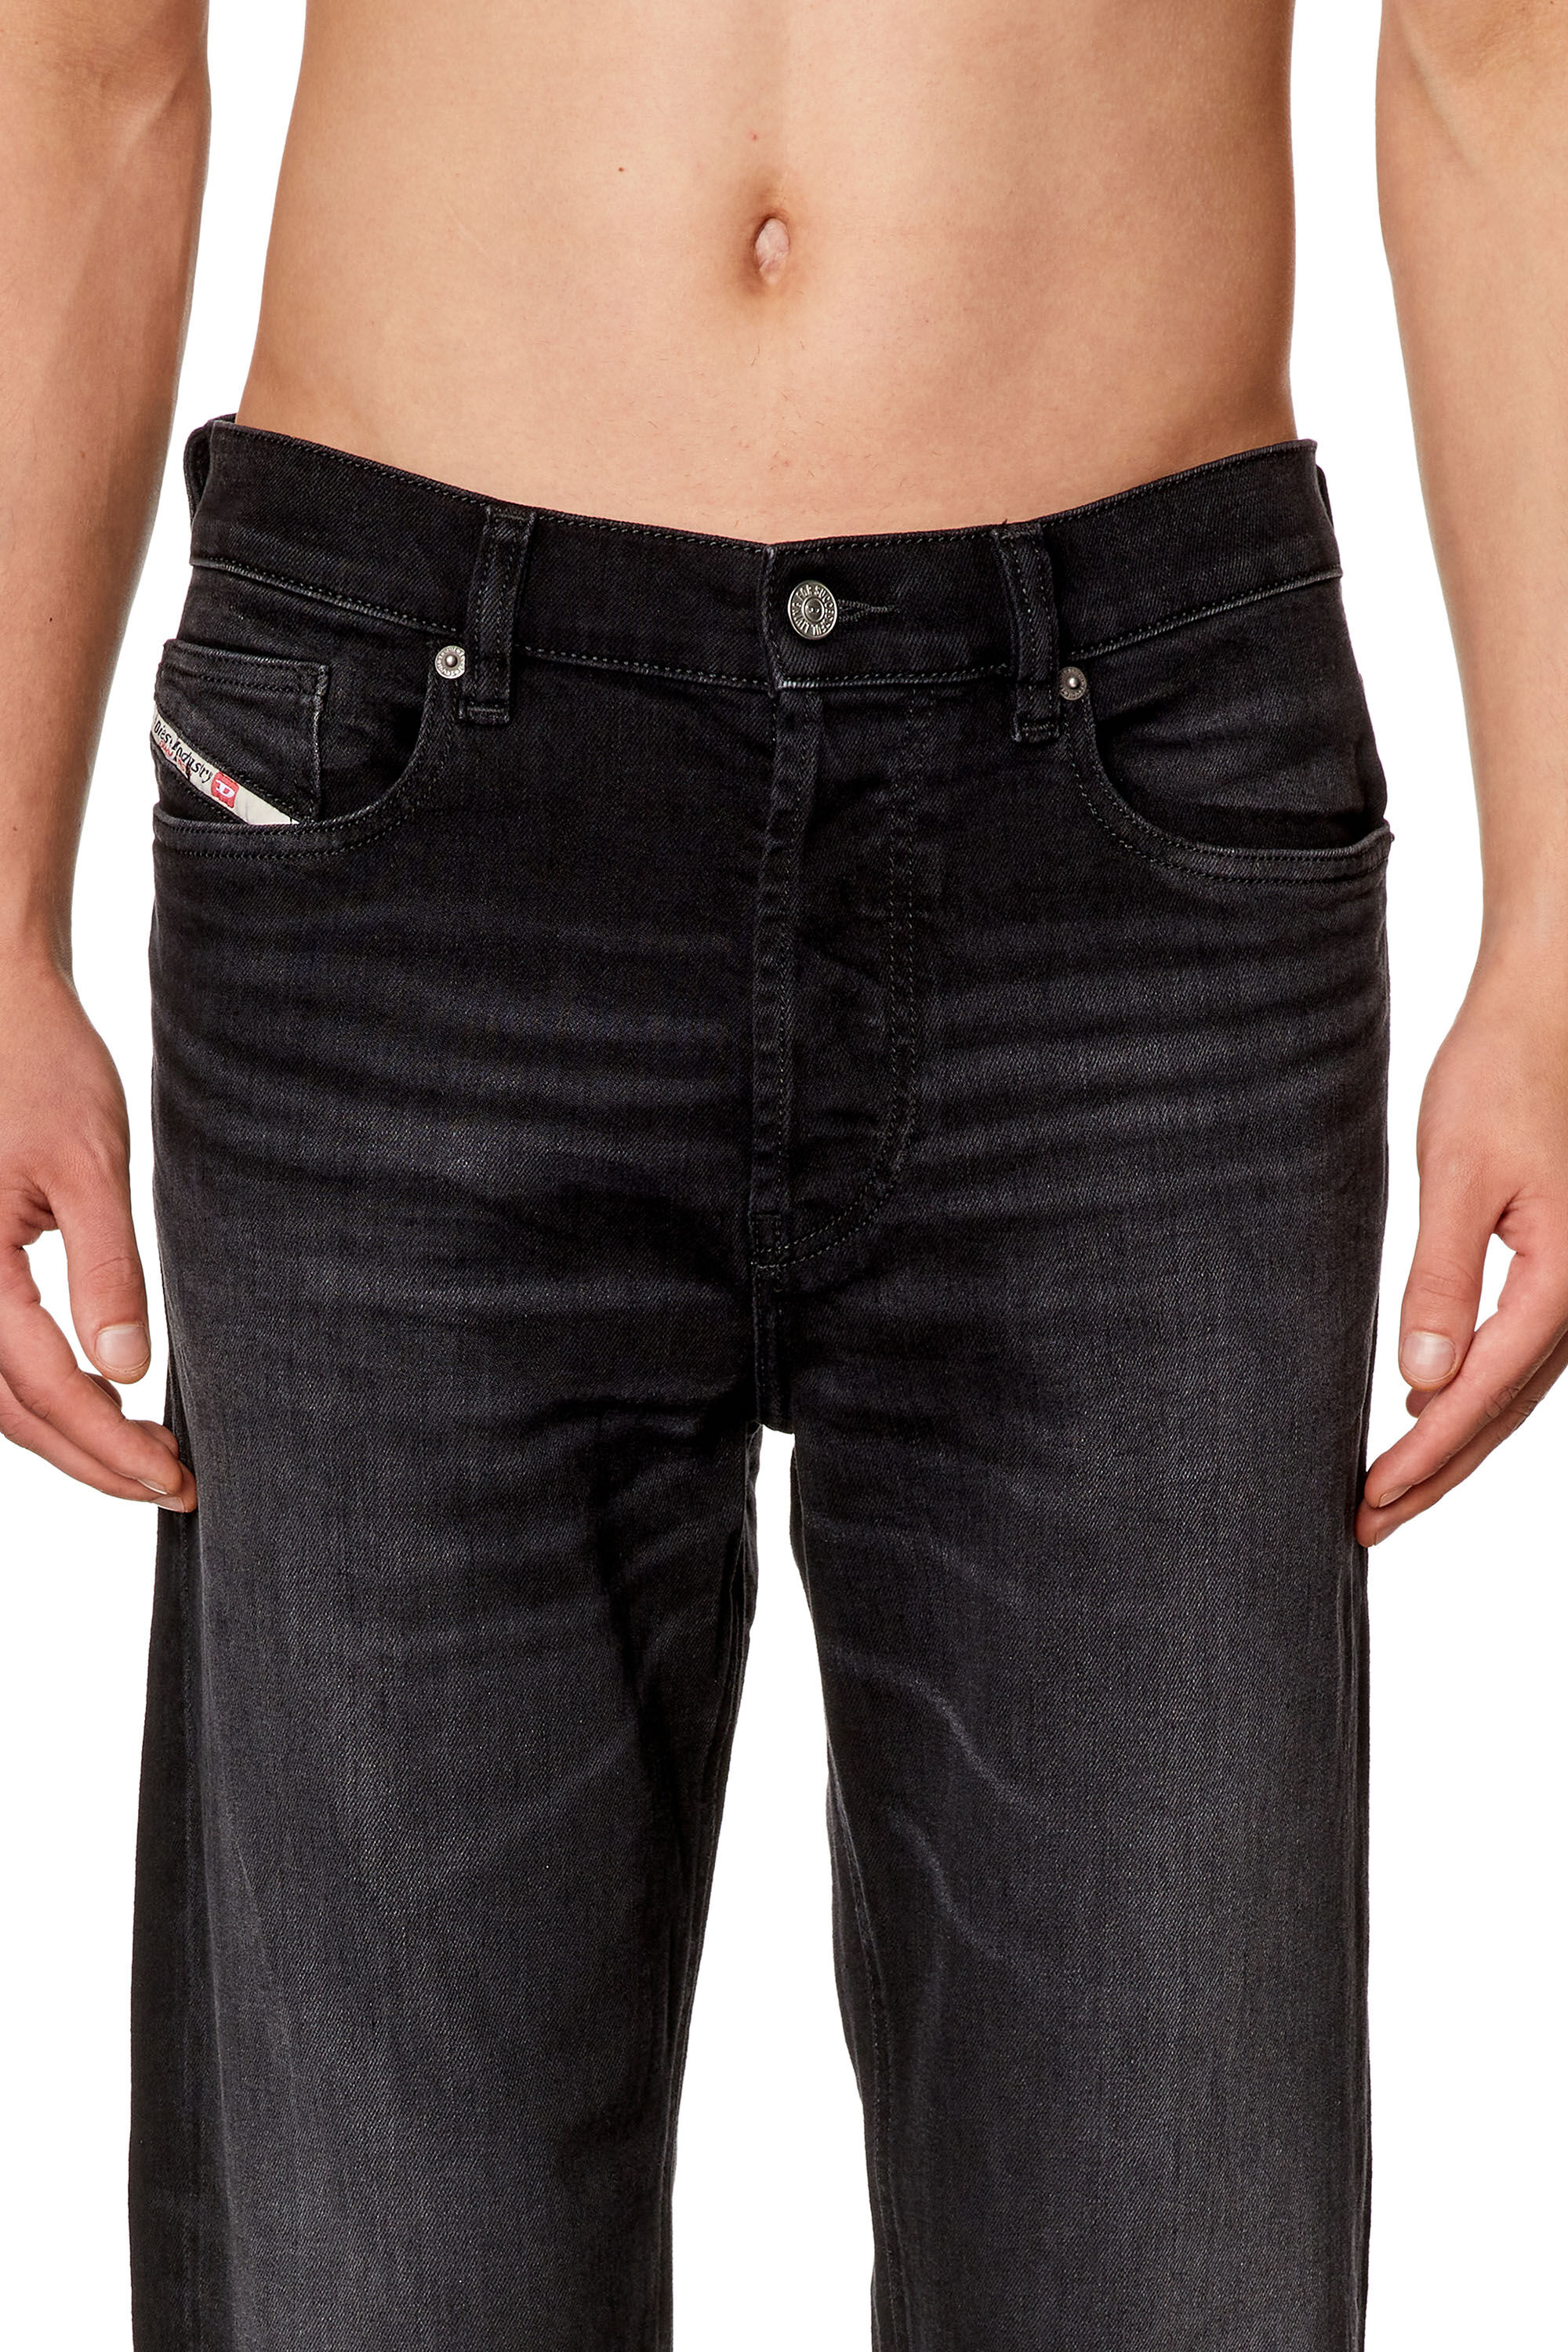 Buy Calvin Klein Jeans Slim Fit Black Jeans from Next France